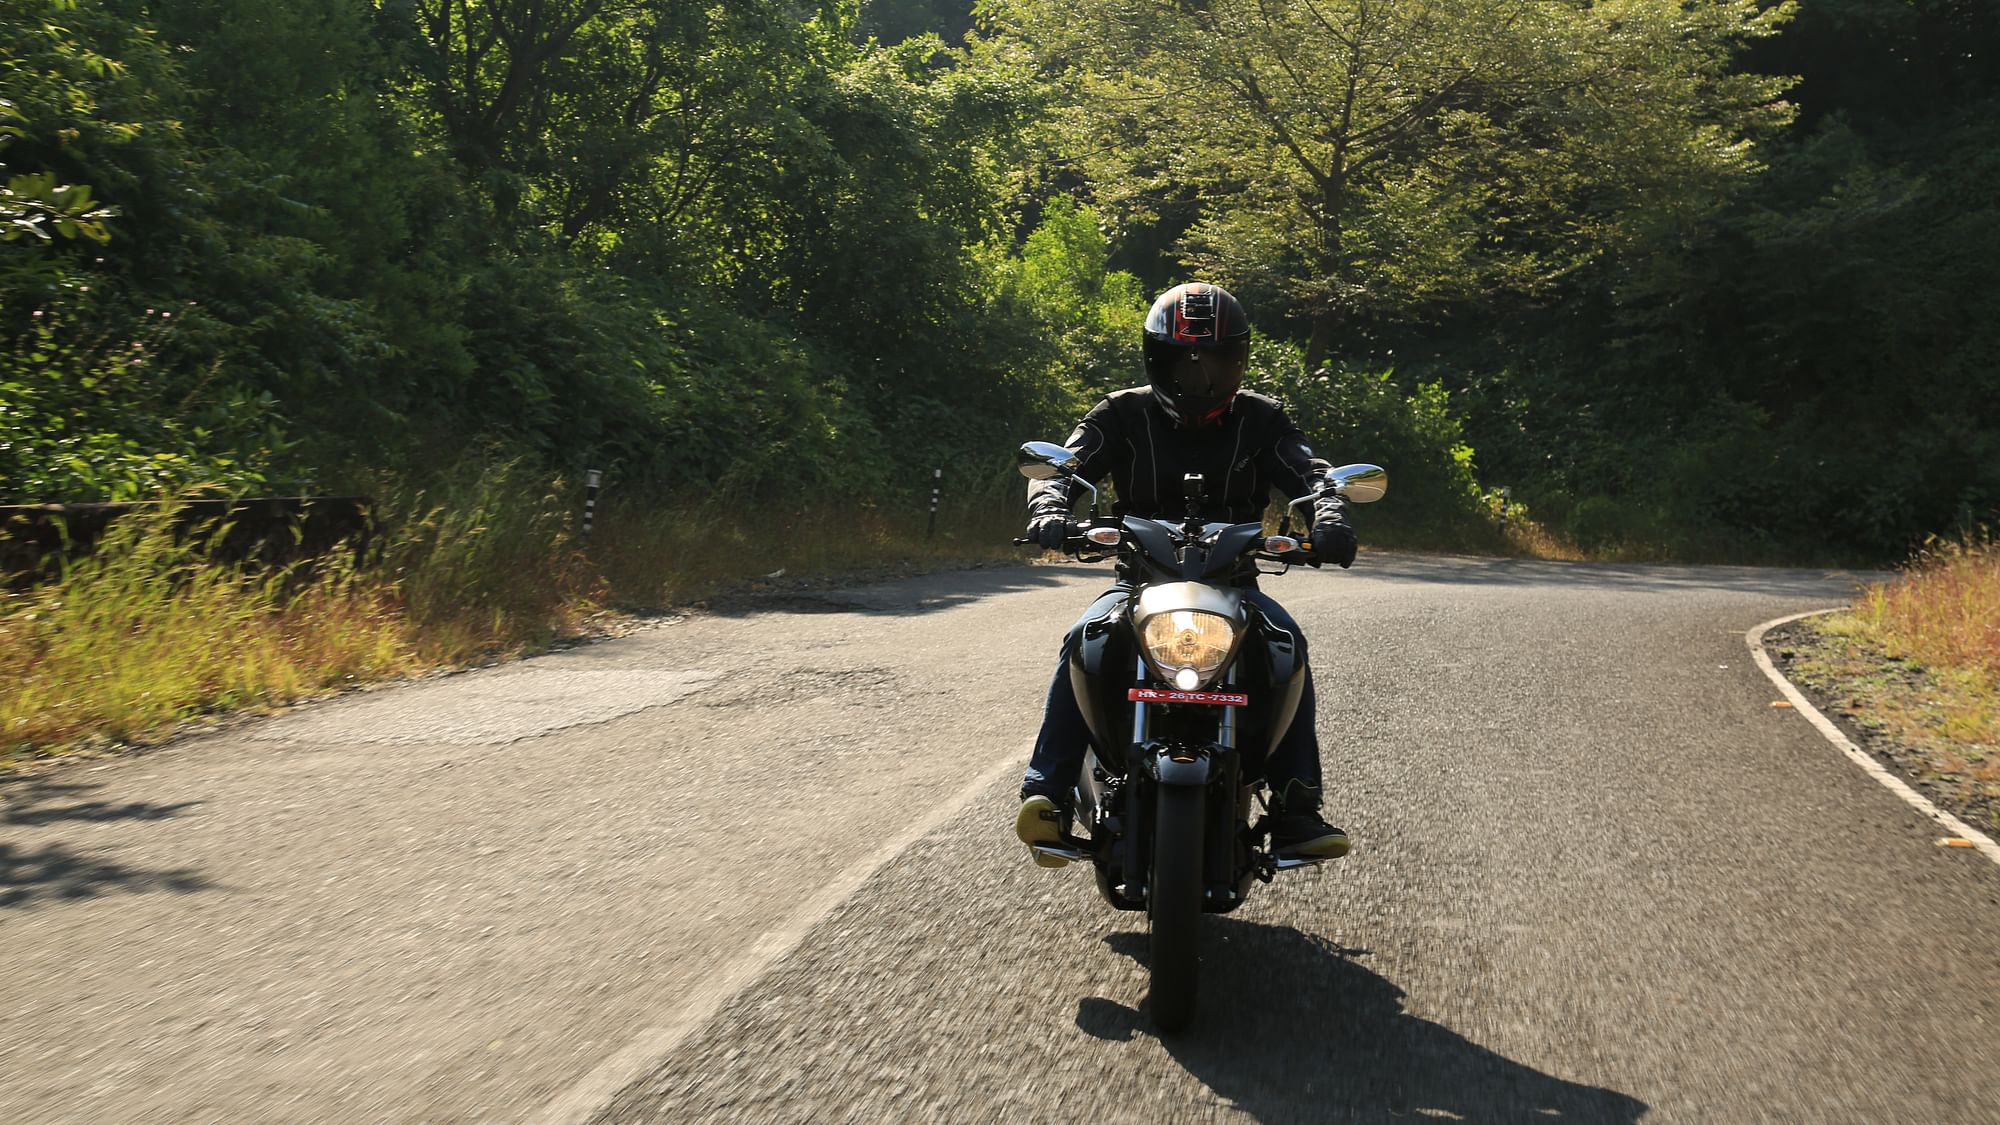 The Intruder 150 comes with the same 155 cc engine as on the Gixxer 150